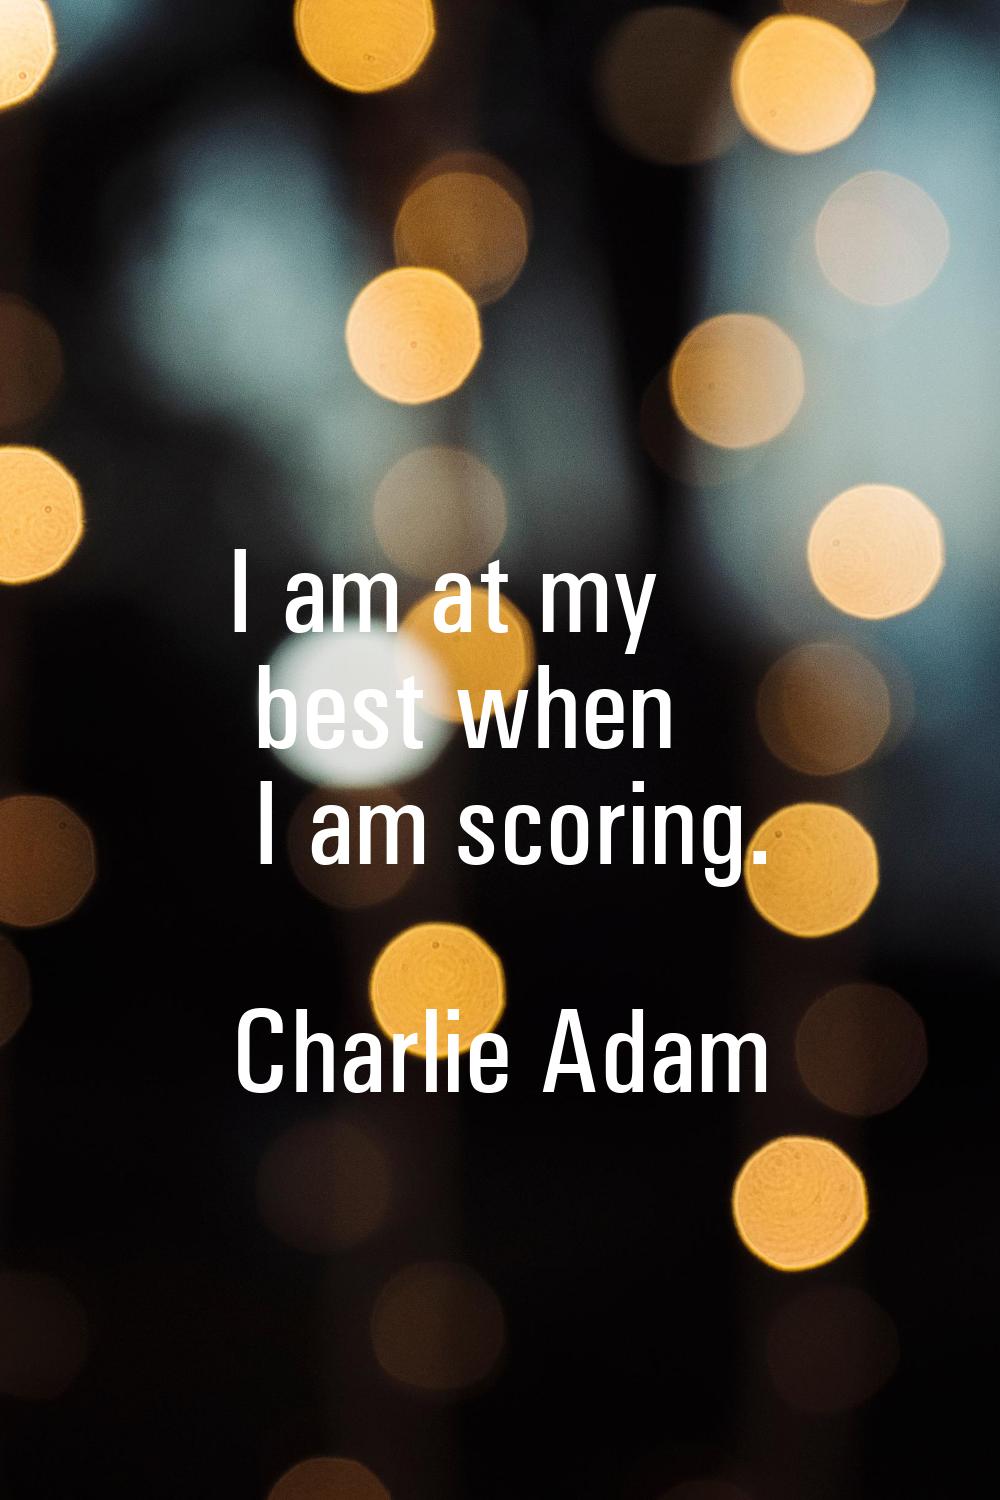 I am at my best when I am scoring.